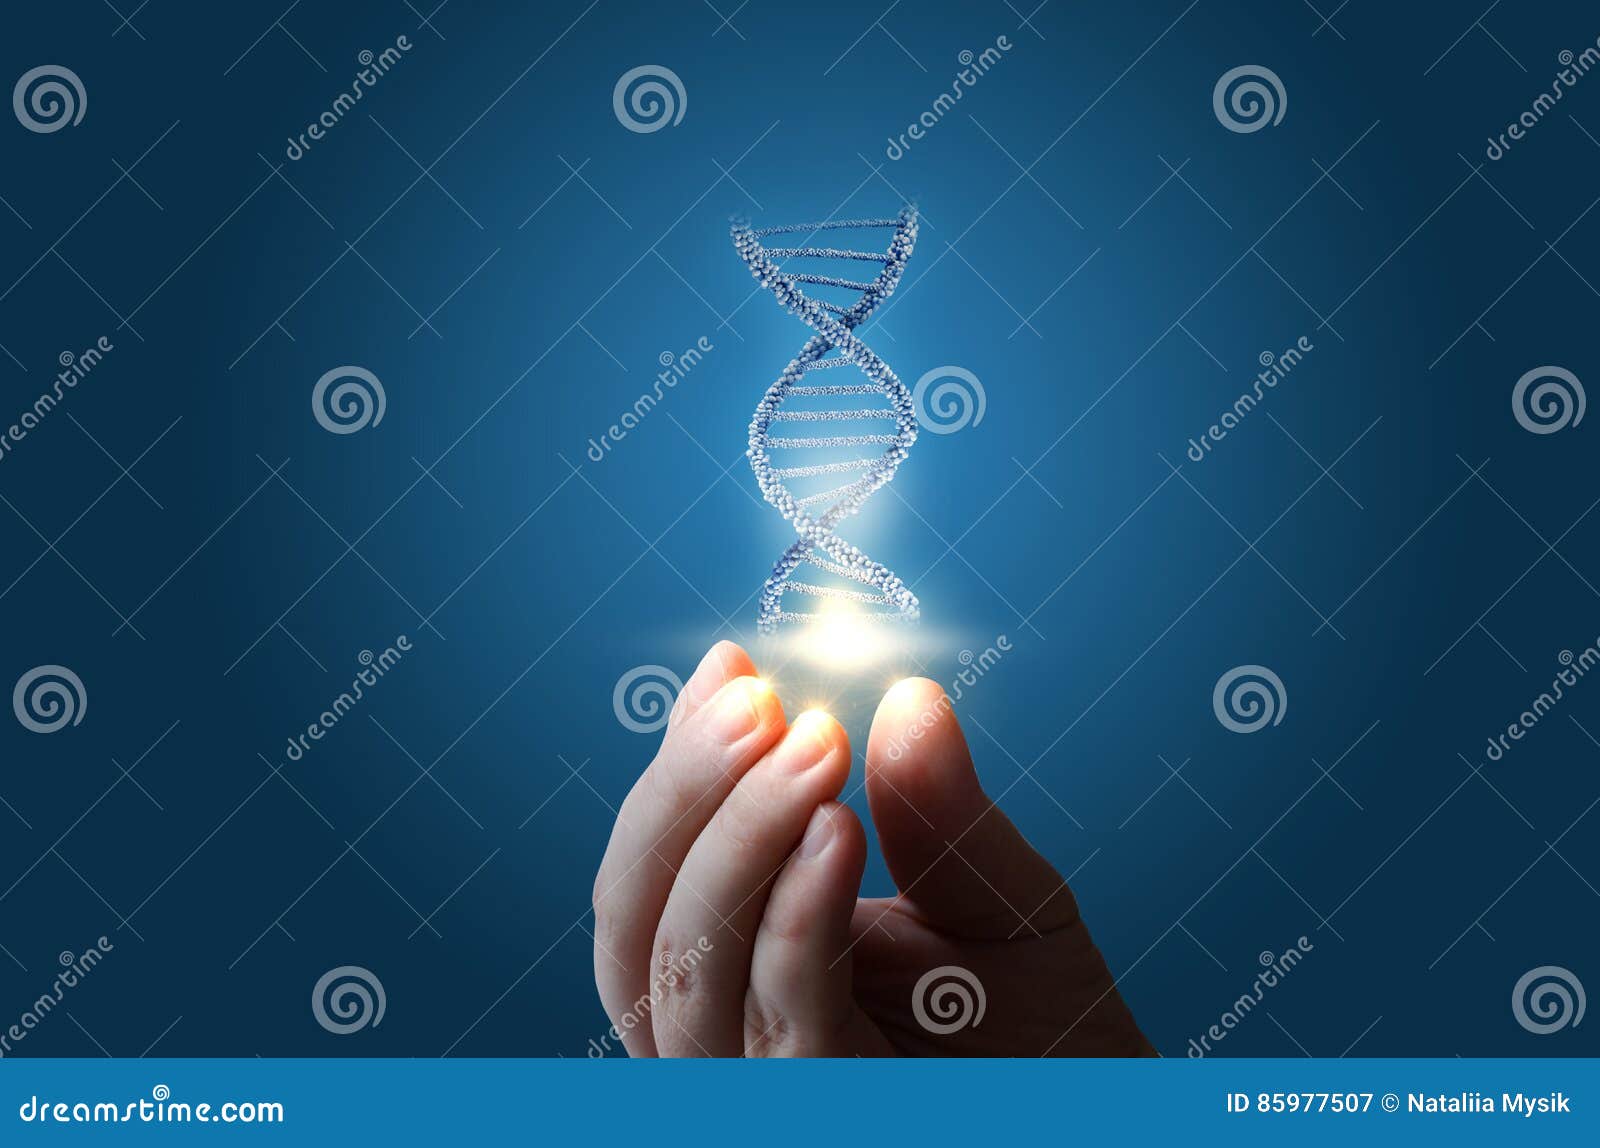 dna in hand on blue background.